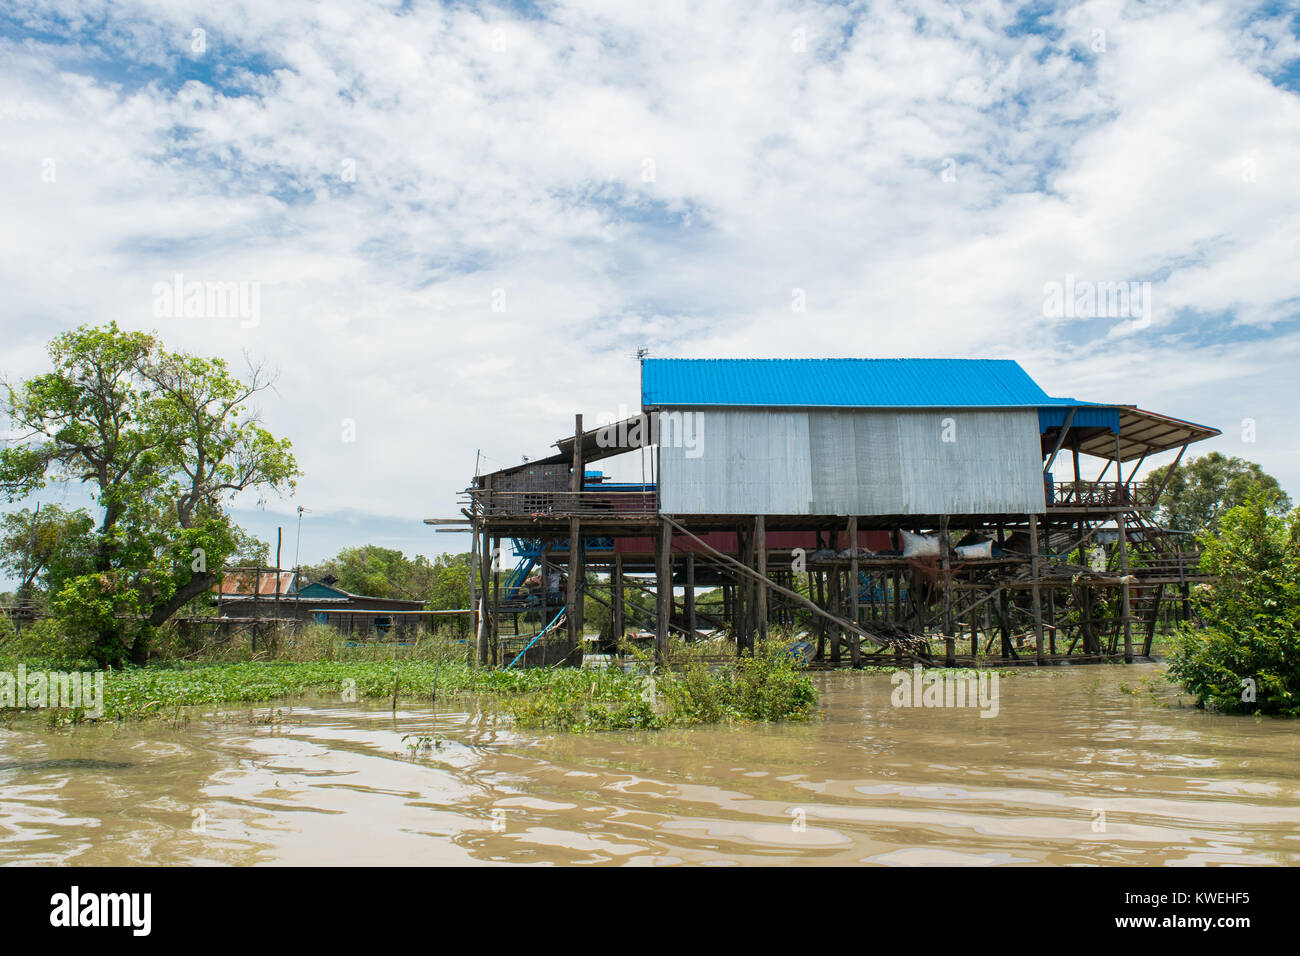 Houses in Kampong Phluk floating village, suspended on stilts over water of Tonle Sap Great Lake floodplain, near Siem Reap, Cambodia, South East Asia Stock Photo